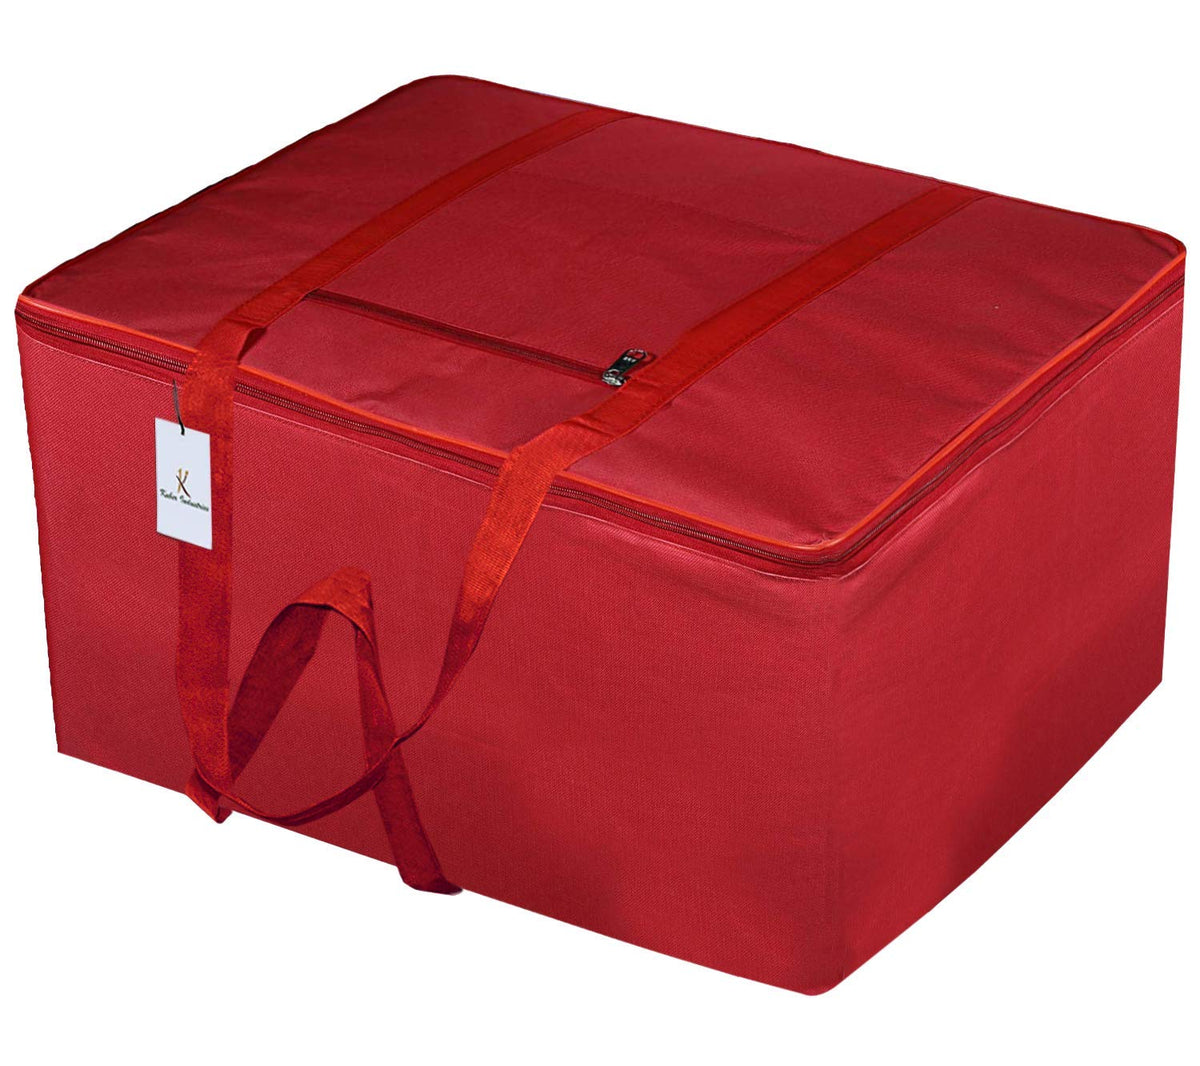 Kuber Industries Small Size Foldable Travel Duffle Bag, Underbed Storage Bag(Red) (Model: F_26_KUBMART016801)